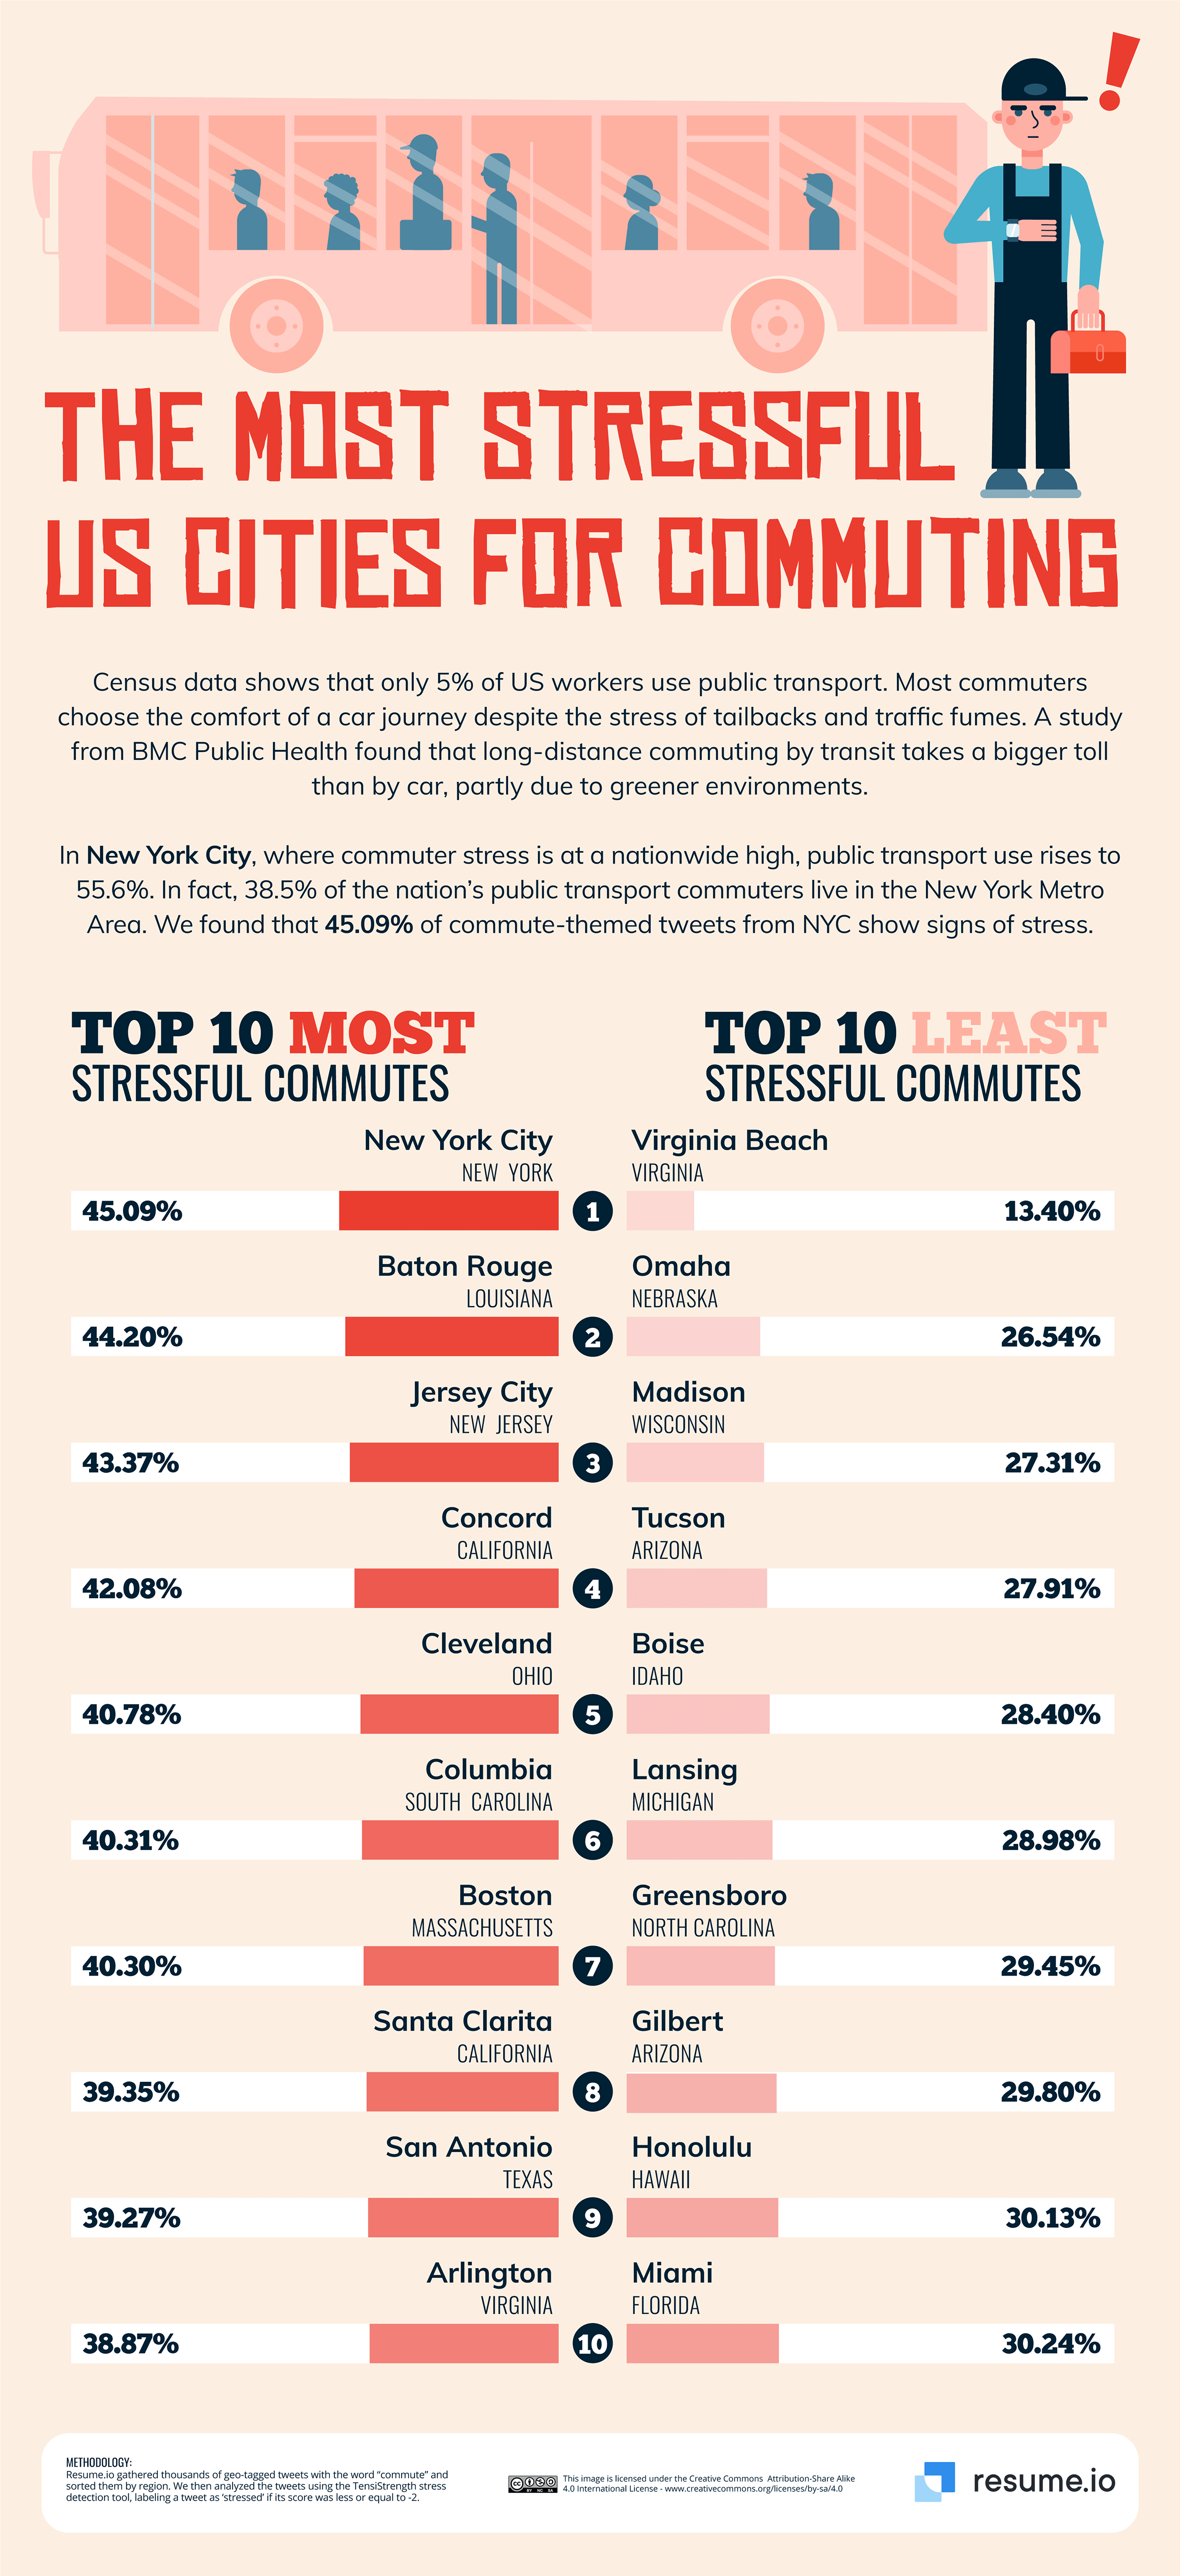 The most stressful US Cities for commuting.